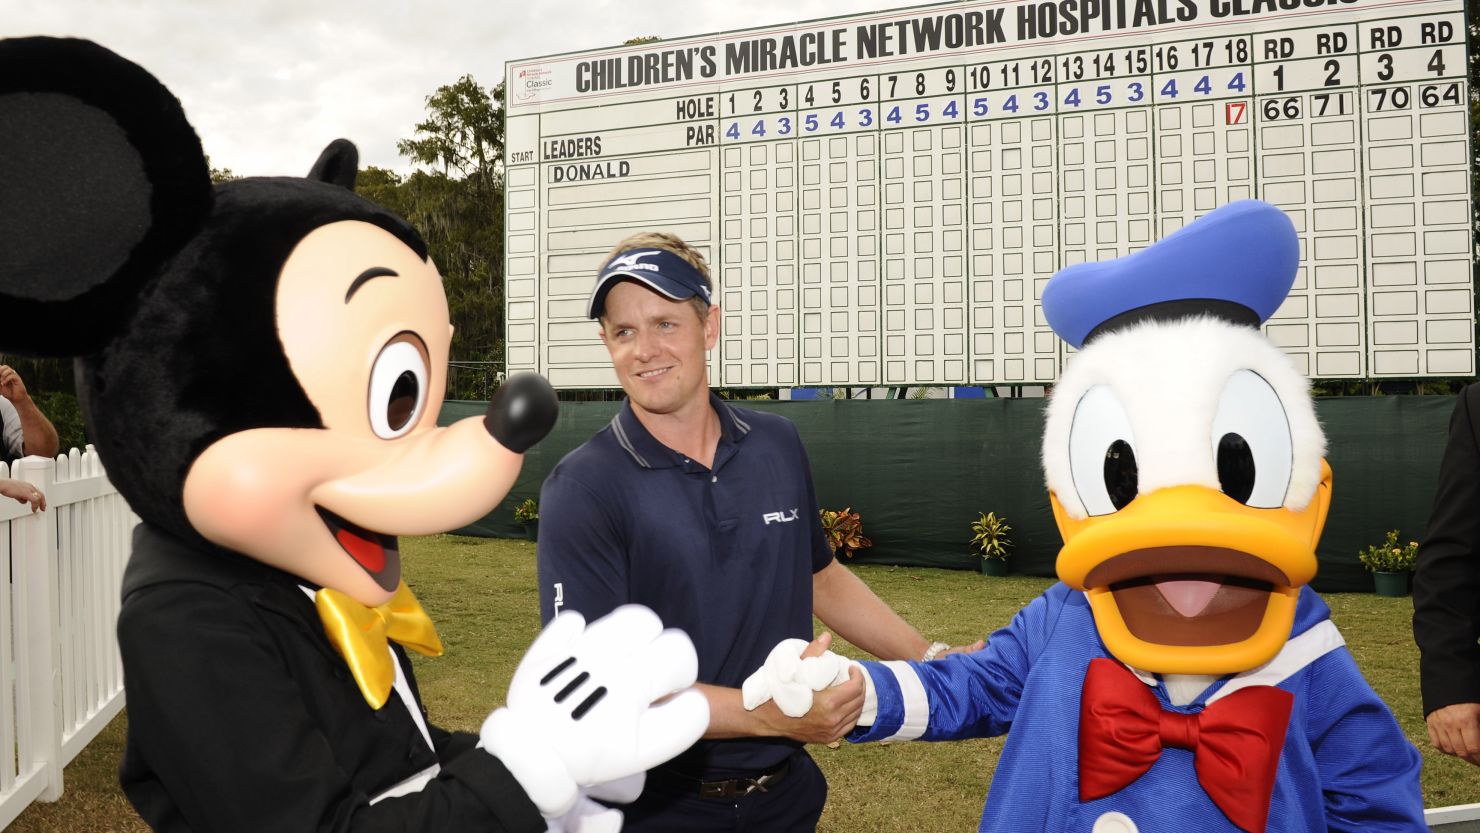 Luke Donald is congratulated by Mickey Mouse and Donald Duck after his decisive victory at the Walt Disney World Resort tournament on Sunday.